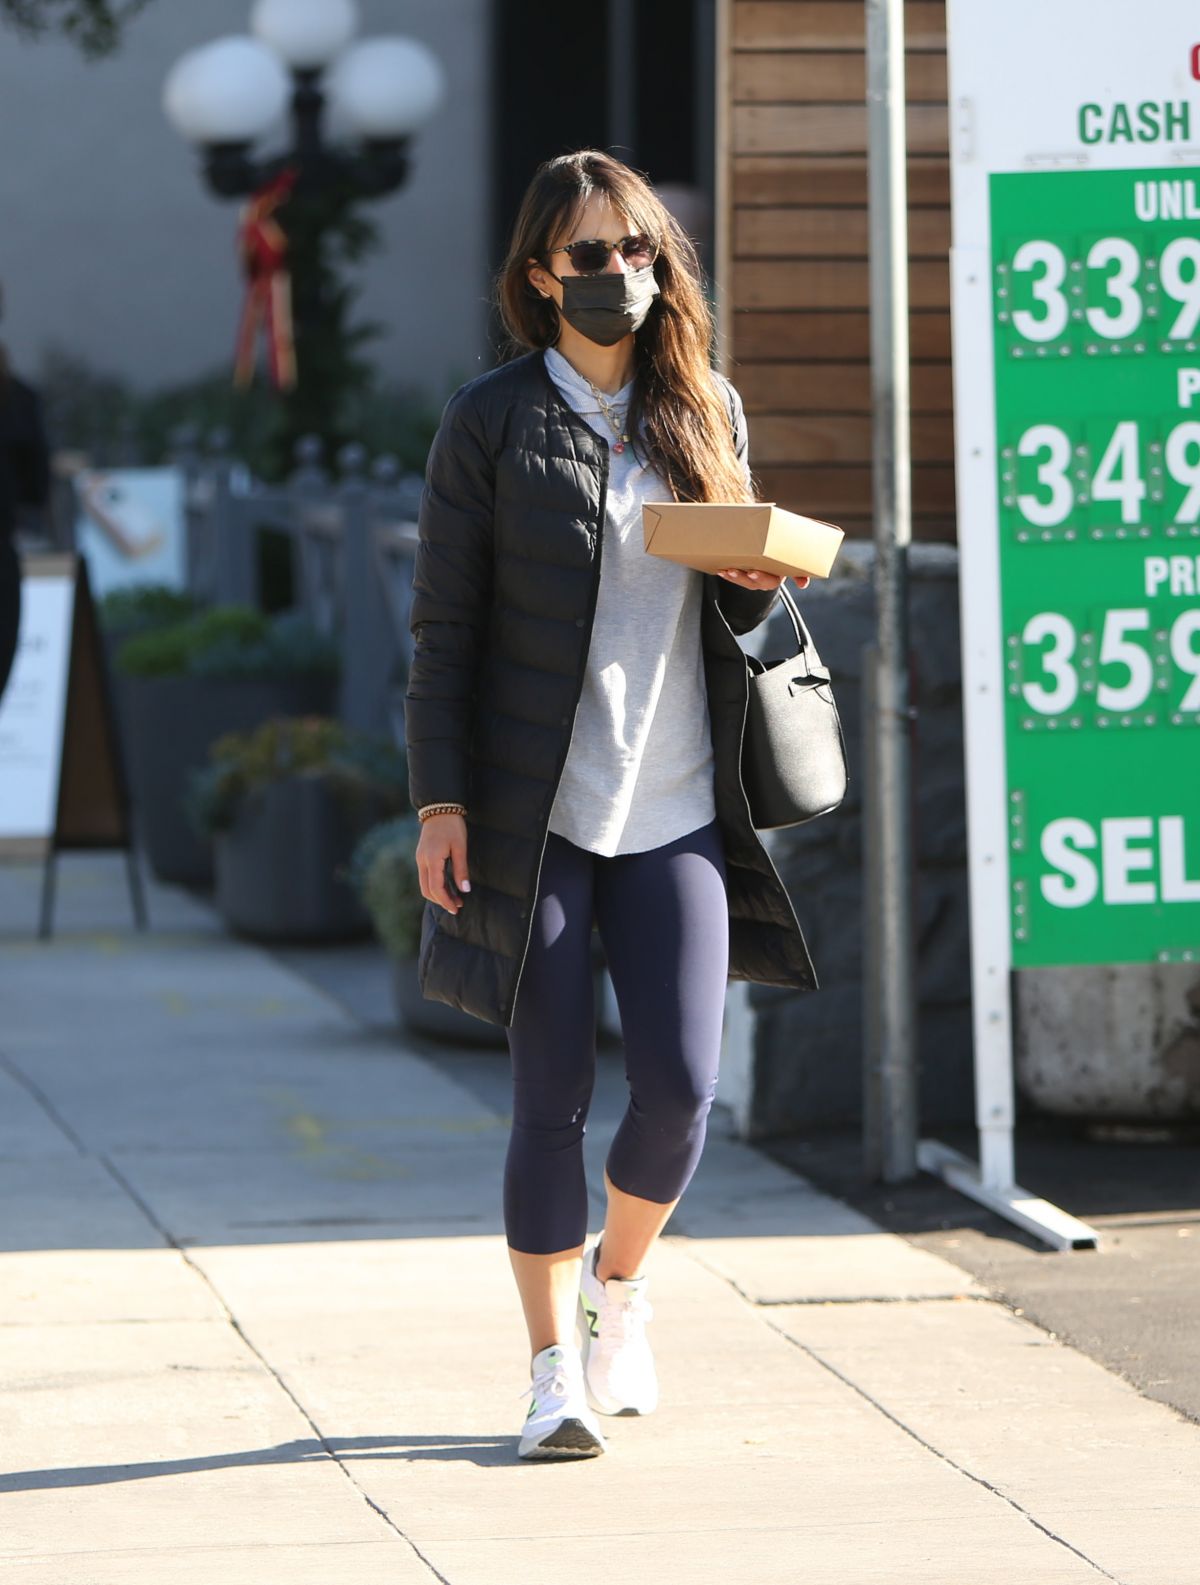 JORDANA BREWSTER at a Gas Station in Brentwood 12/05/2020 – HawtCelebs